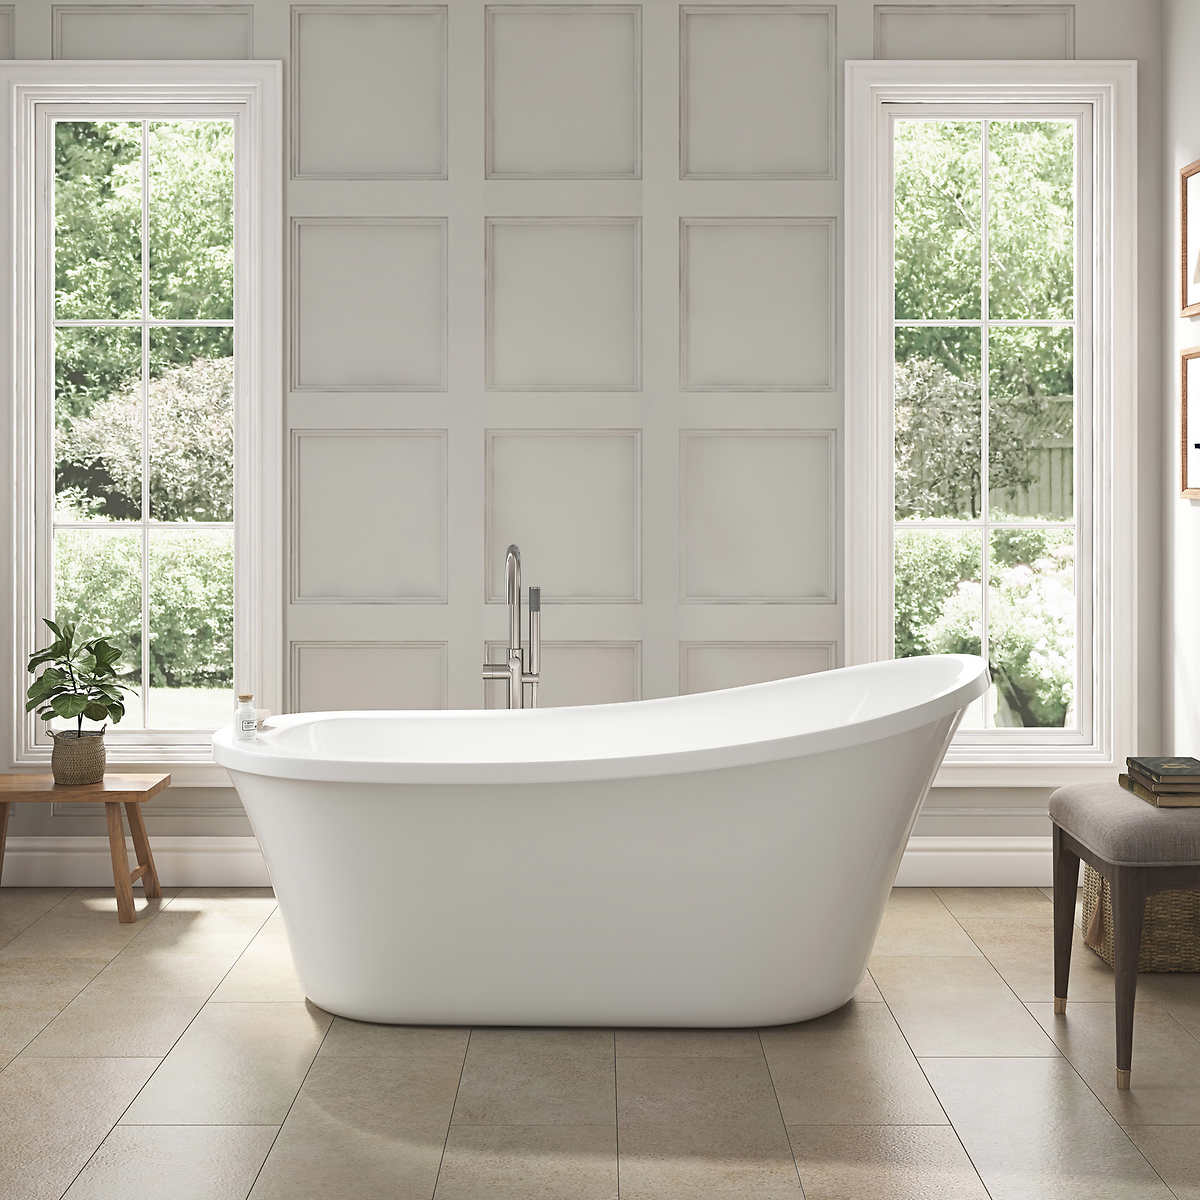 Recipe for How to Decorate a Bathtub - Welsh Design Studio